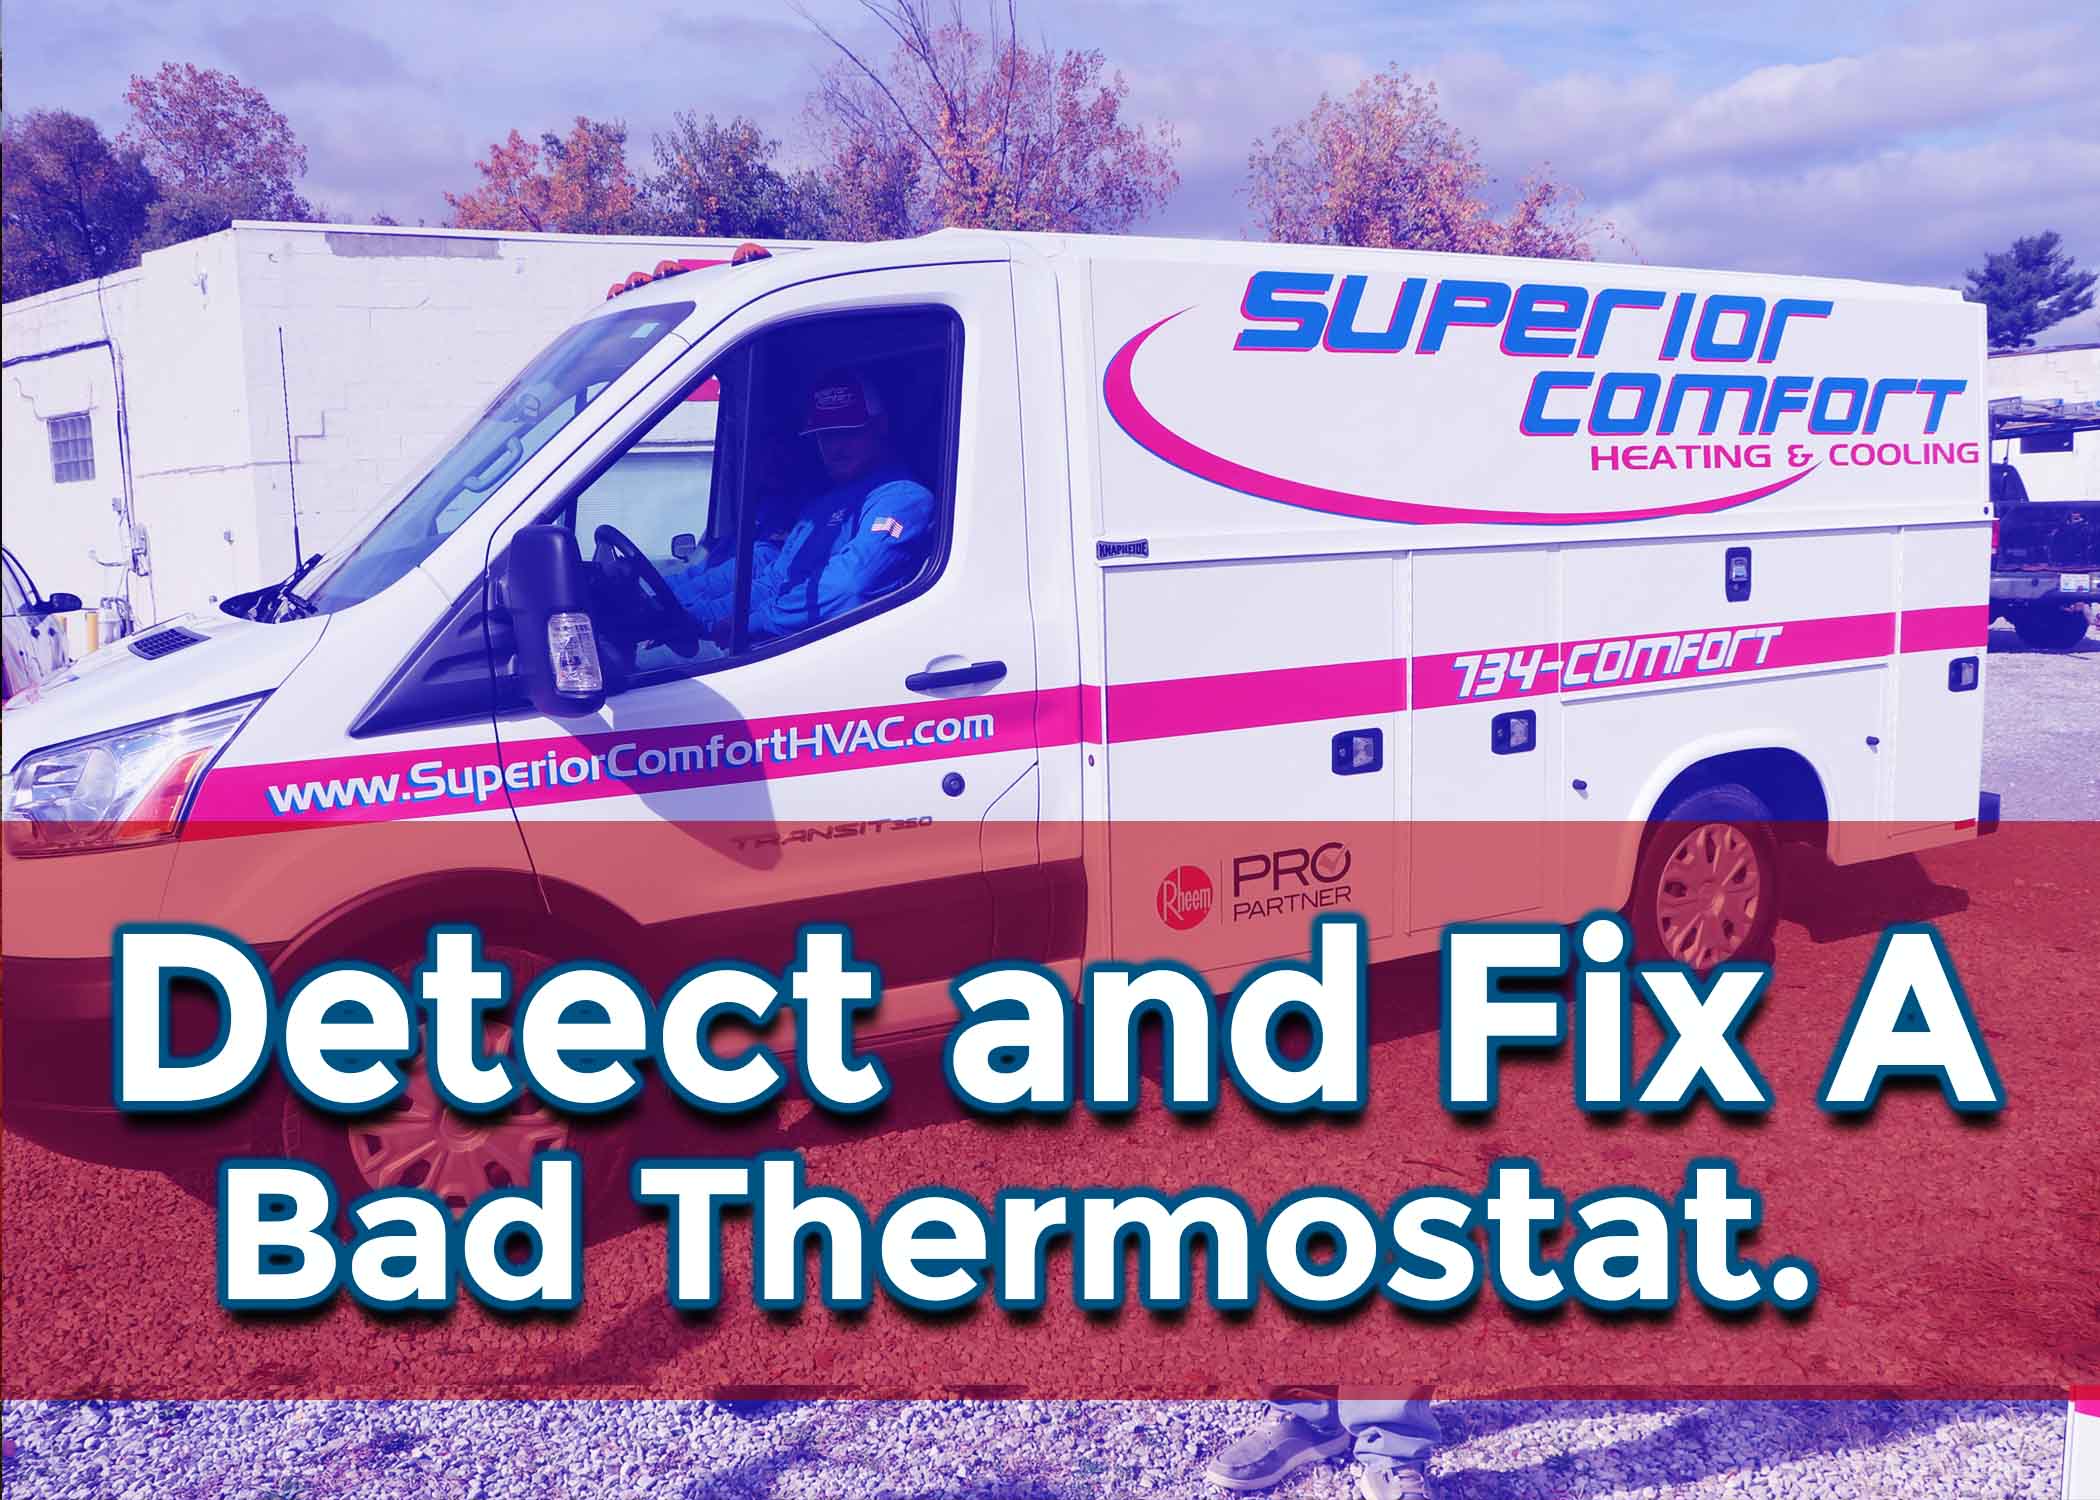 Detect and Fix a Bad Thermostat